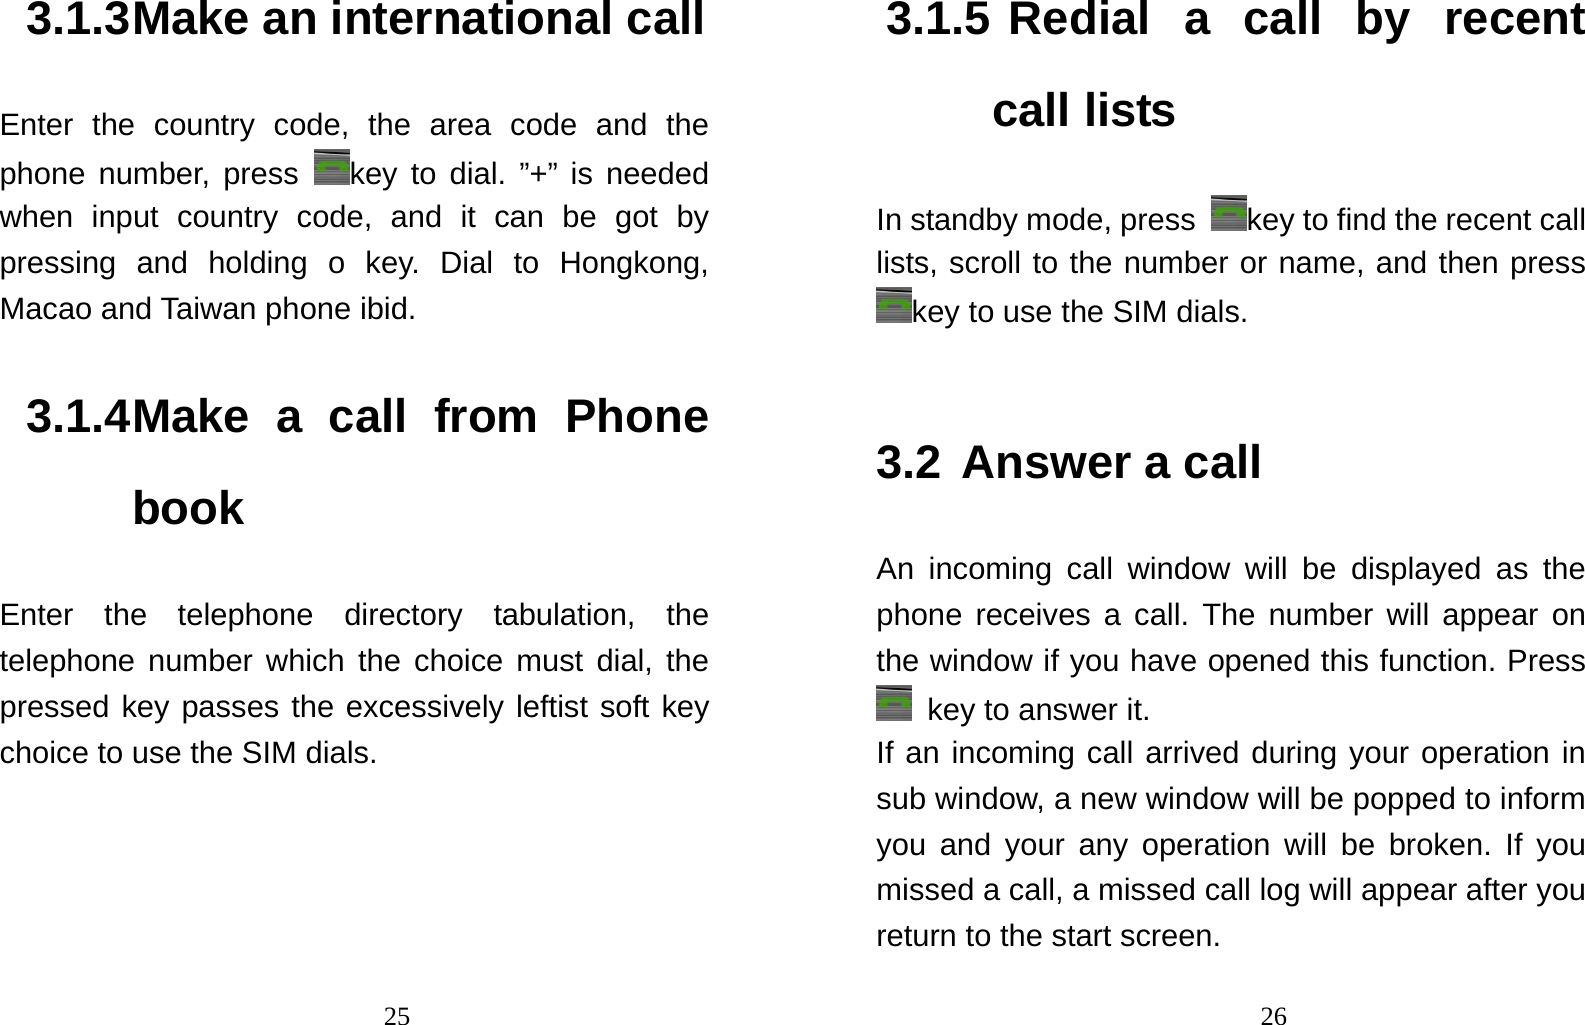                                253.1.3 Make an international call Enter the country code, the area code and the phone number, press  key to dial. ”+” is needed when input country code, and it can be got by pressing and holding o key. Dial to Hongkong, Macao and Taiwan phone ibid. 3.1.4 Make a call from Phone book Enter the telephone directory tabulation, the telephone number which the choice must dial, the pressed key passes the excessively leftist soft key choice to use the SIM dials.                                263.1.5 Redial a call by recent call lists In standby mode, press  key to find the recent call lists, scroll to the number or name, and then press key to use the SIM dials.  3.2 Answer a call An incoming call window will be displayed as the phone receives a call. The number will appear on the window if you have opened this function. Press   key to answer it.   If an incoming call arrived during your operation in sub window, a new window will be popped to inform you and your any operation will be broken. If you missed a call, a missed call log will appear after you return to the start screen. 